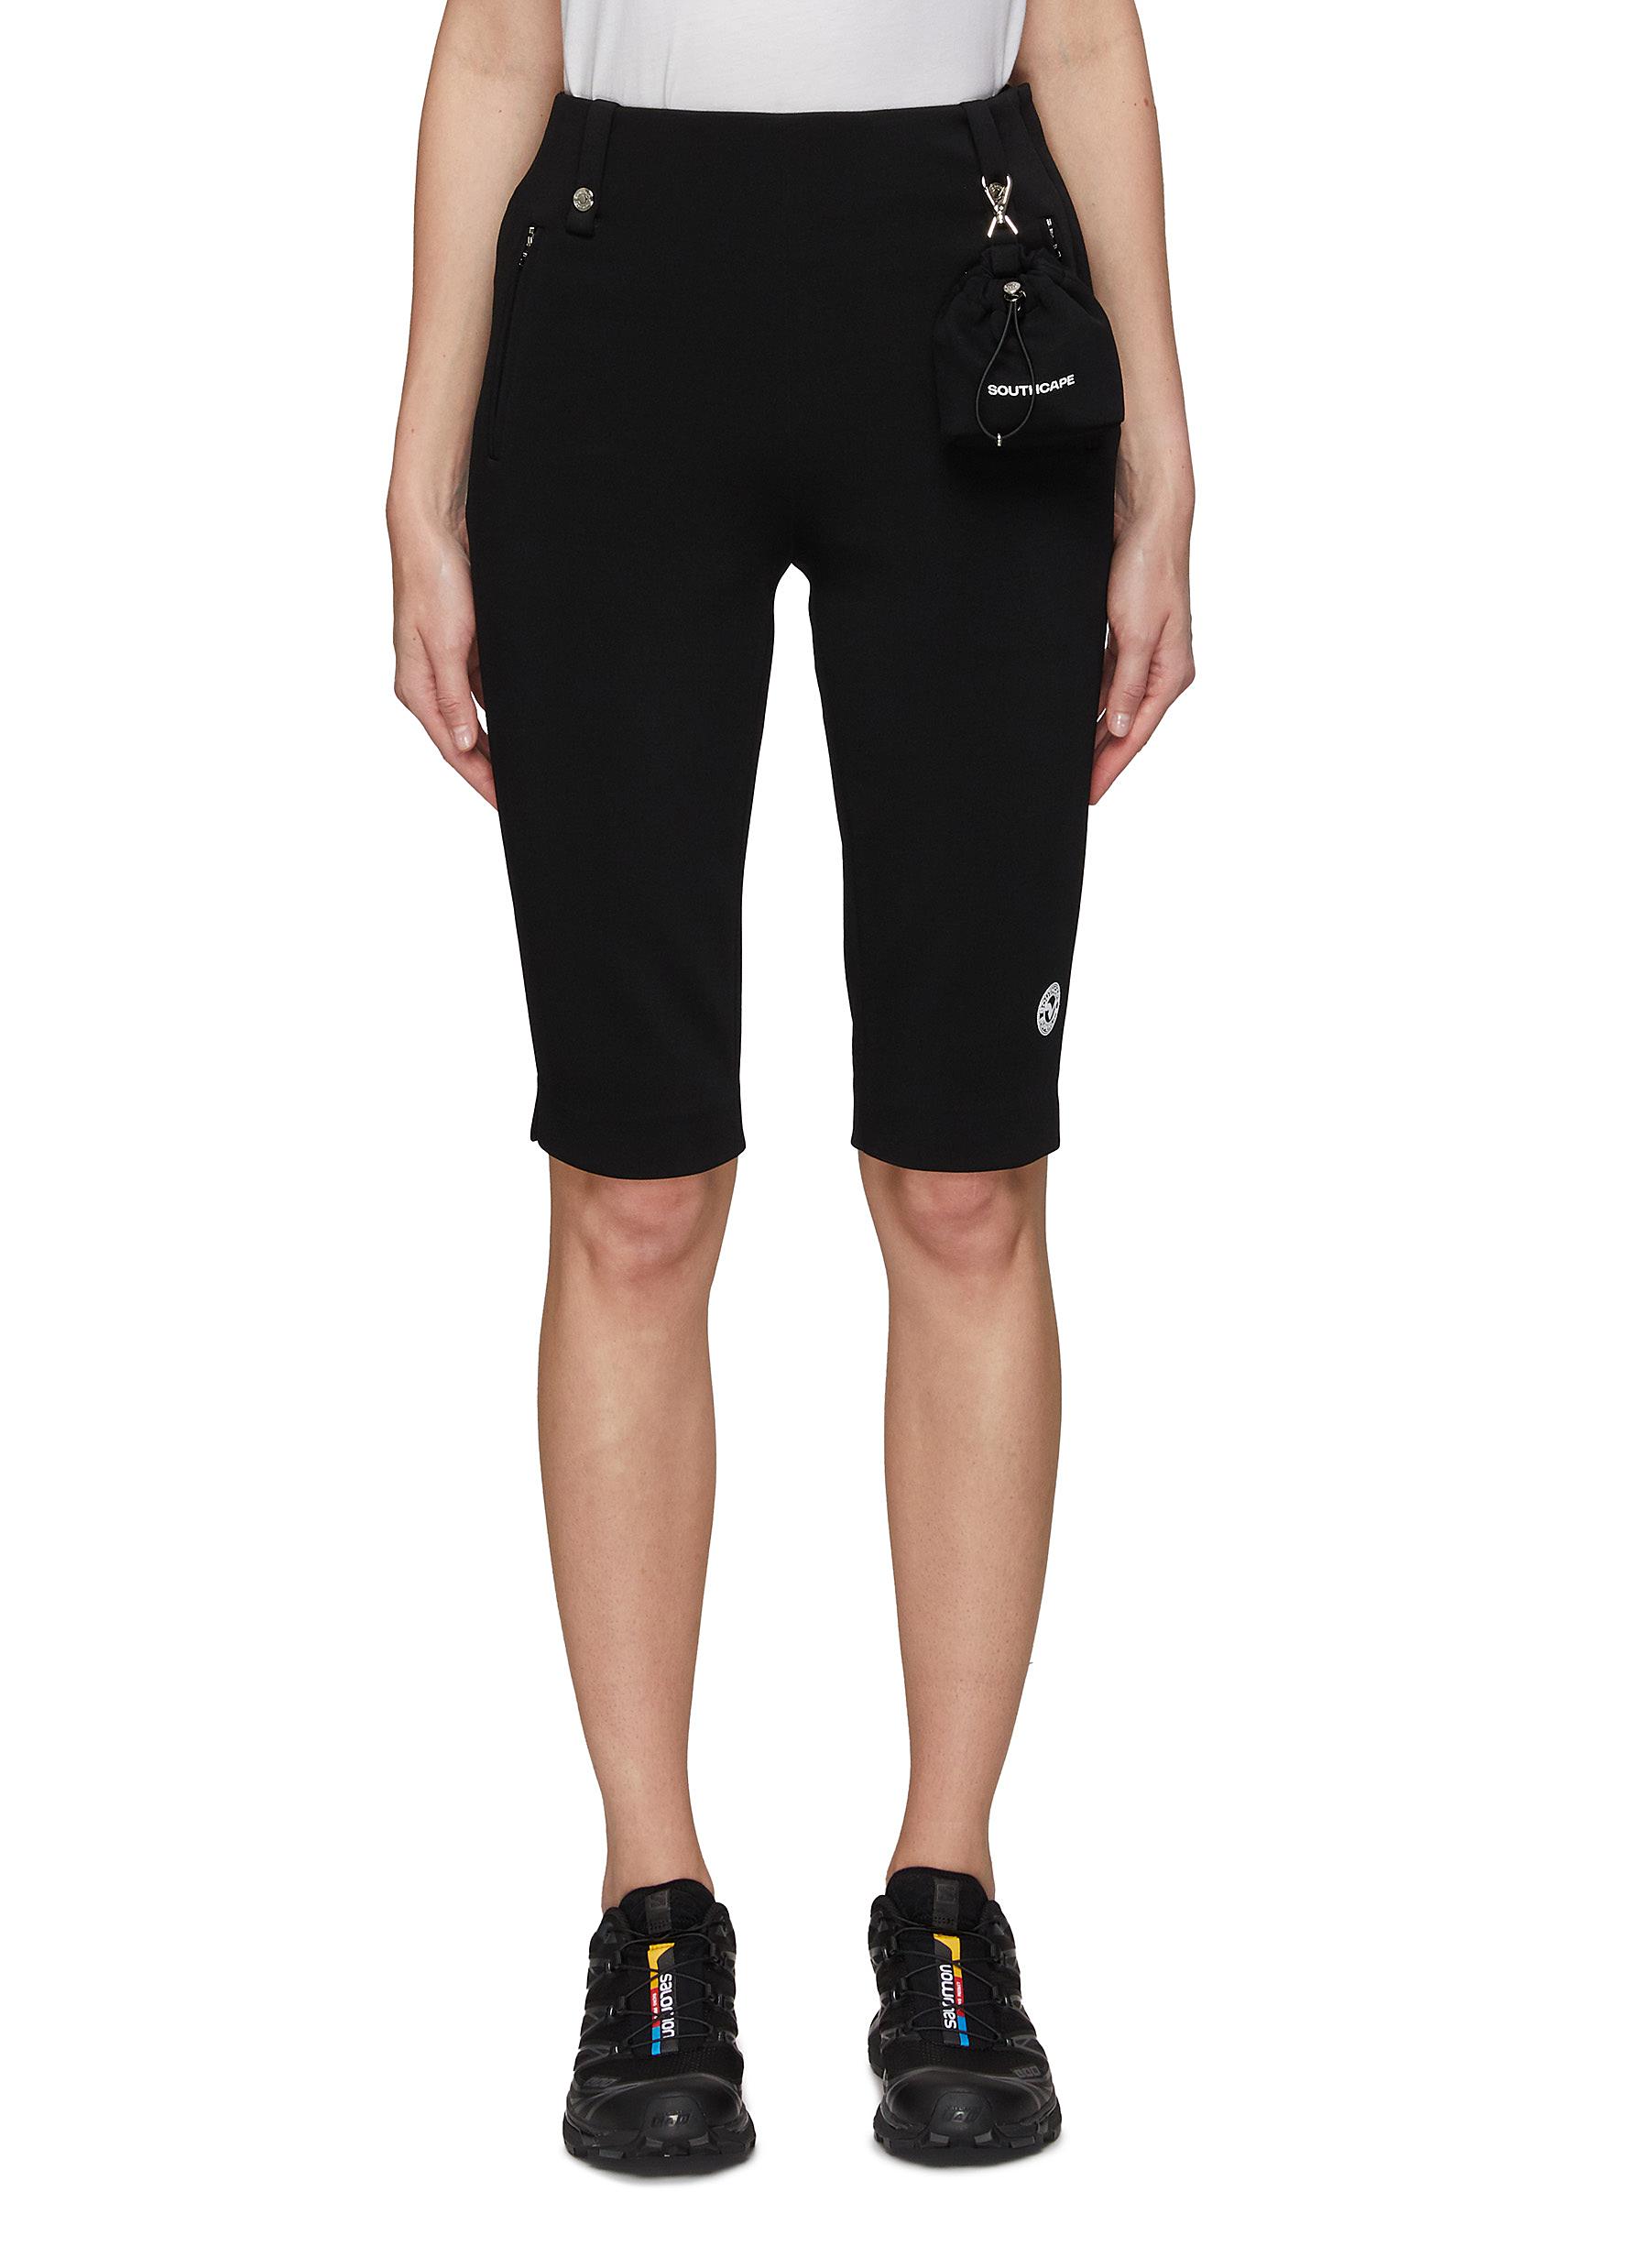 Southcape Biker Shorts With Drawstring Pouch In Black